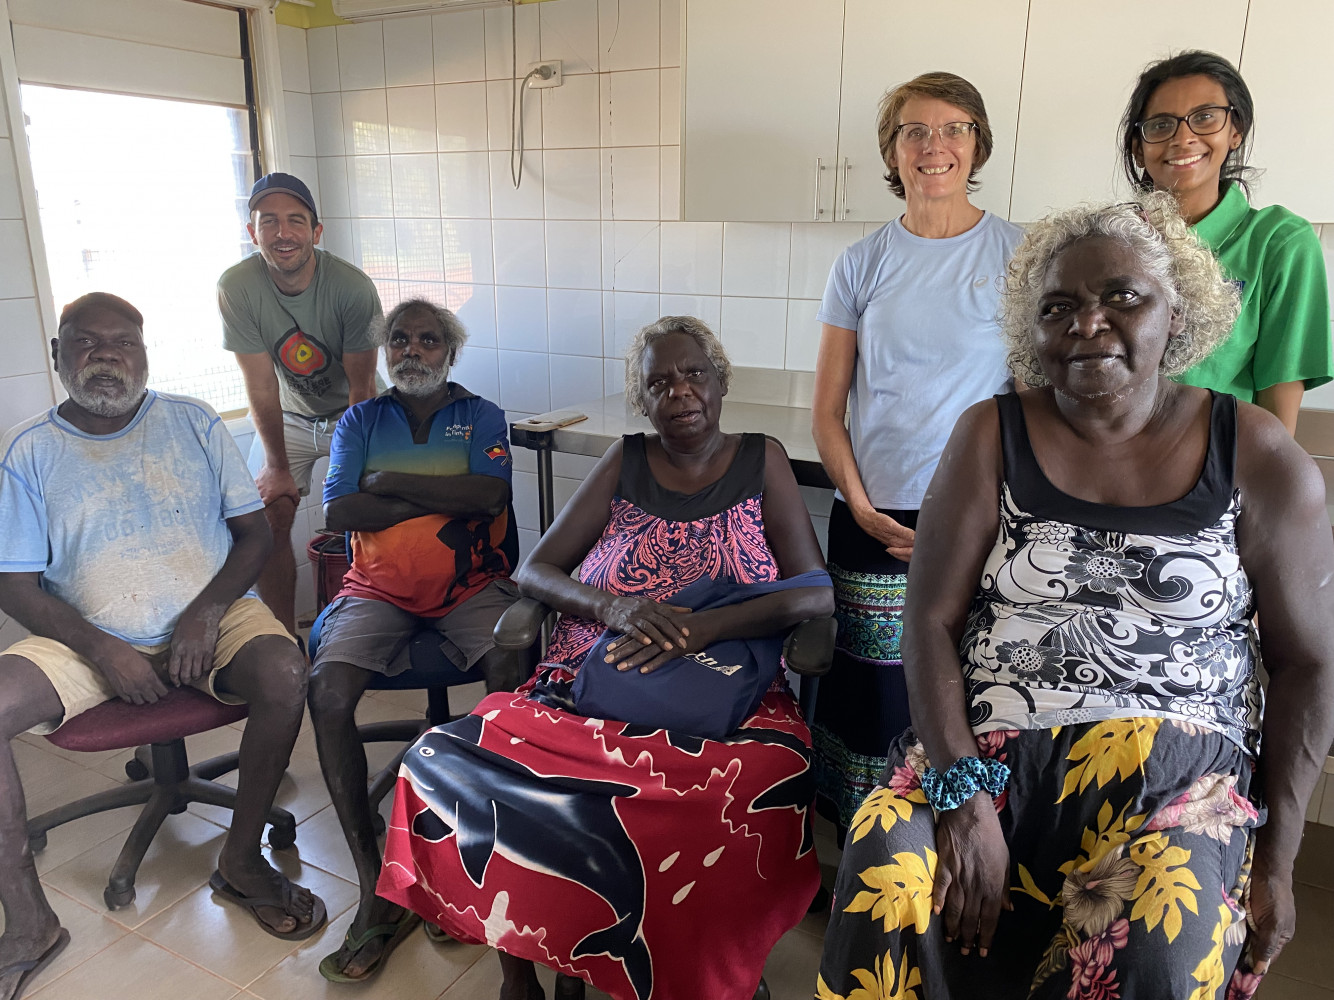 Research team members on Elcho Island. Front row left to right: George Gurruwiwi, Kenny Gongnini, Ruth Gulamanda and Mrs Dhurrkay. Second row, Josh Tynan, Beverley Ann-Biggs, Hasthi Dissanayake (Photo used with approval from individuals and families)